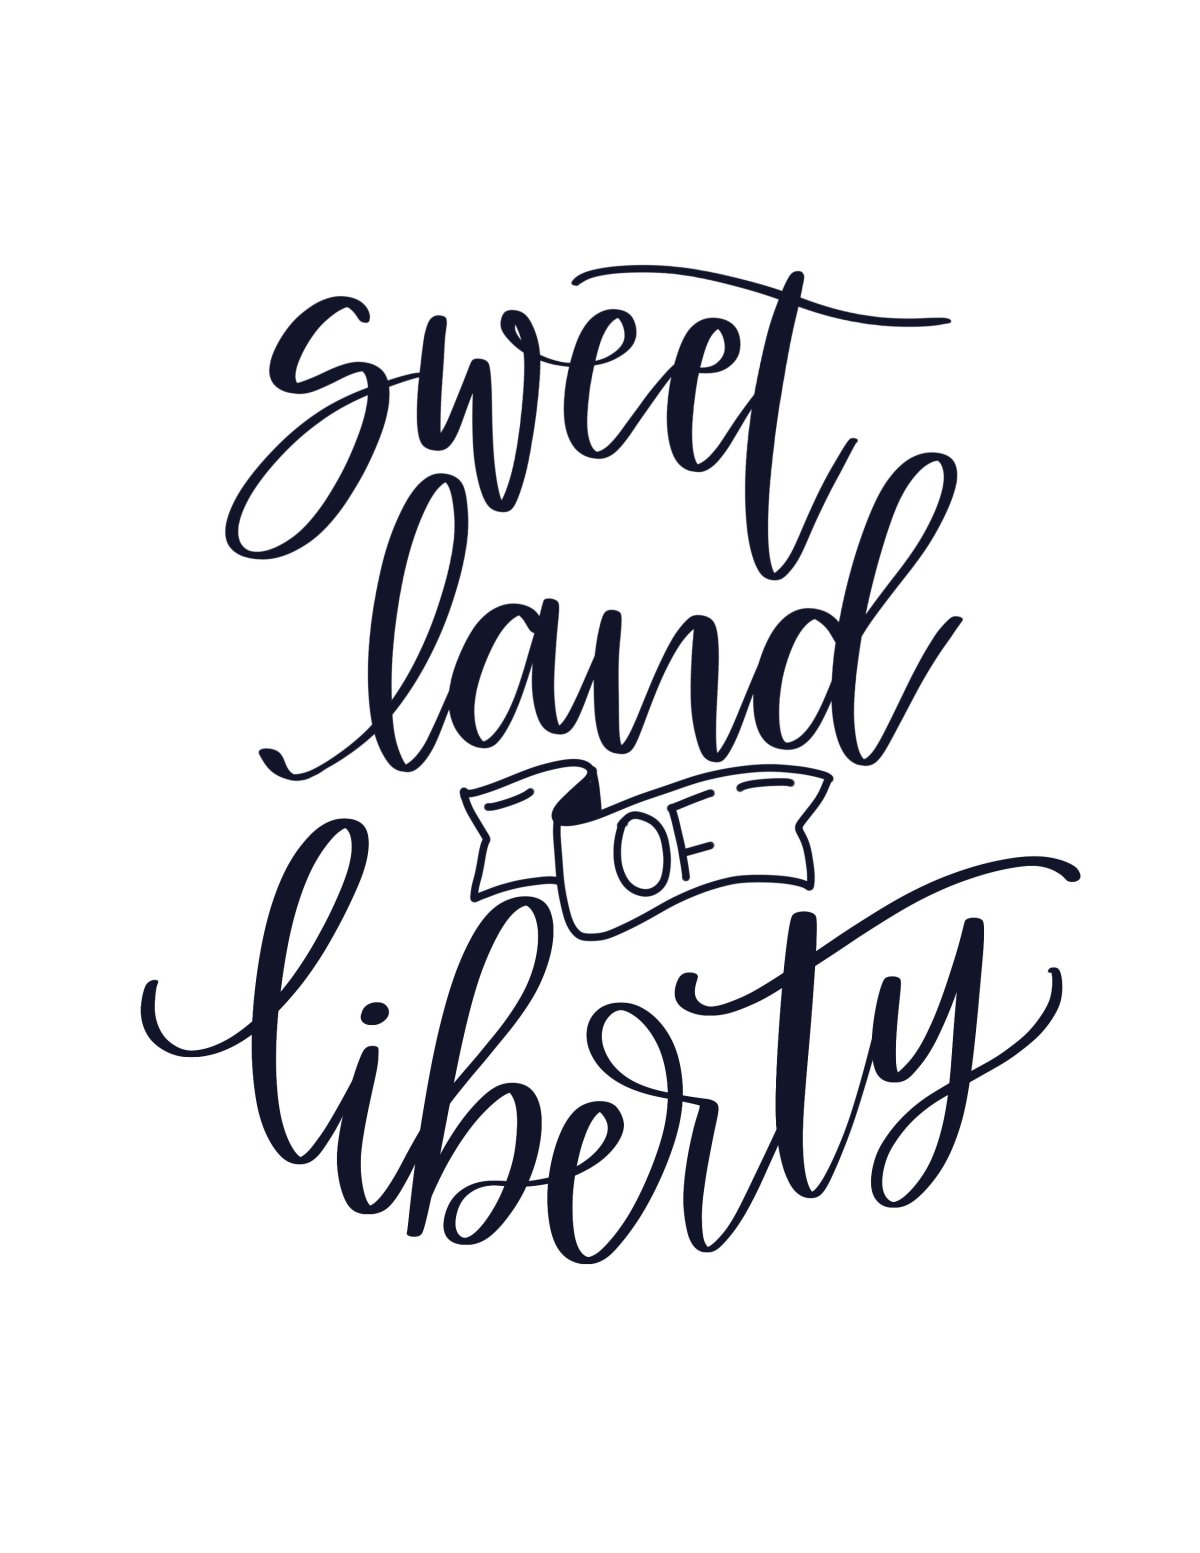 Image contains the words, "sweet land of liberty" written in modern calligraphy.